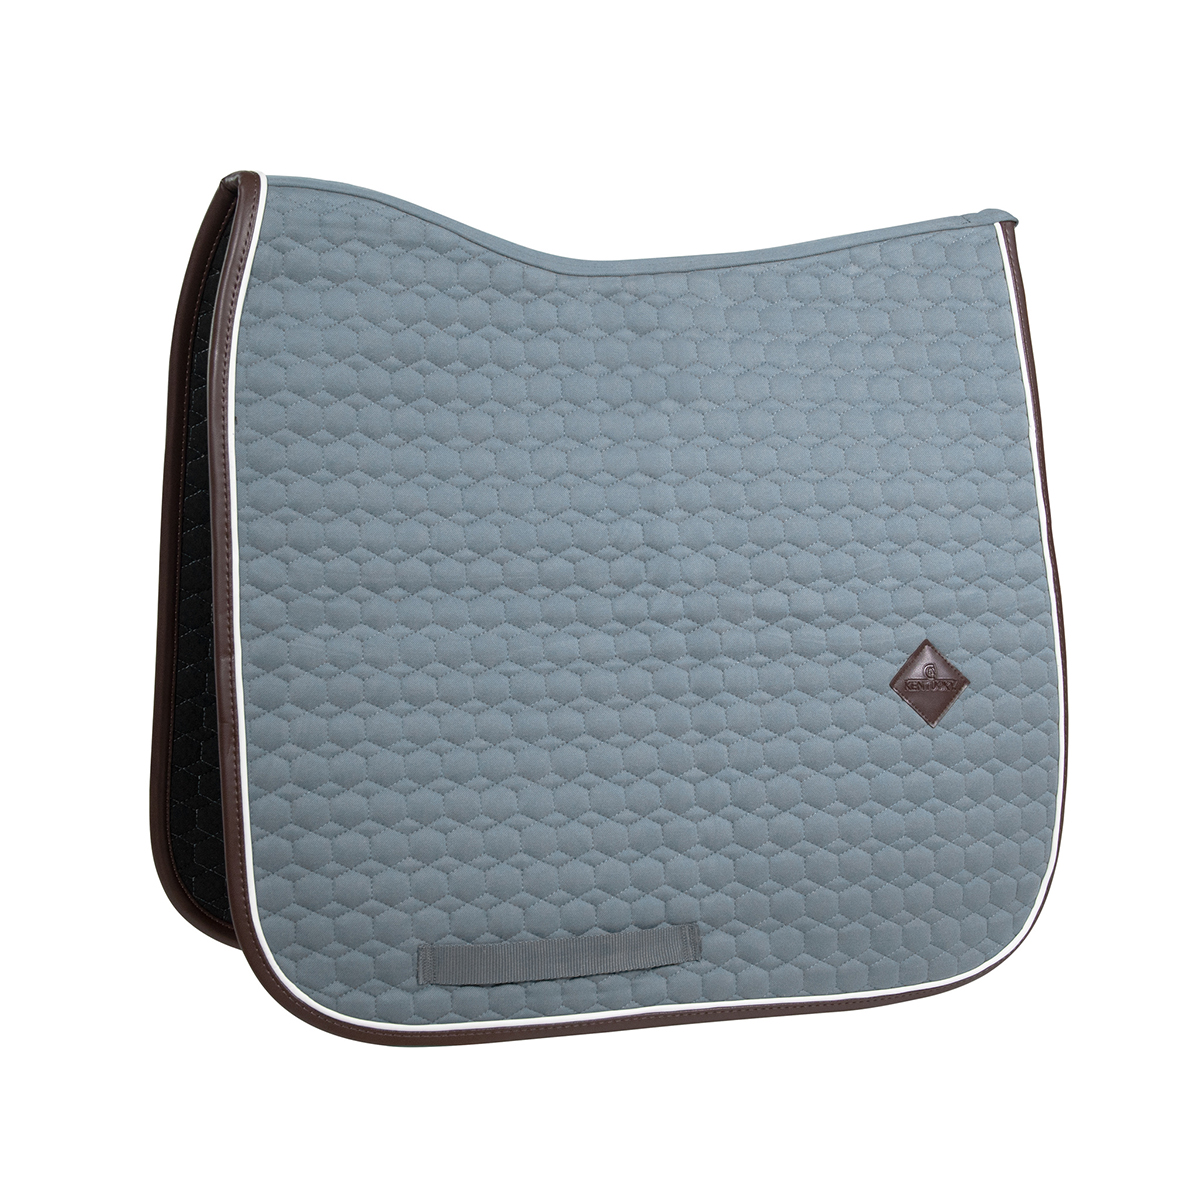 Kentucky Saddle Pad Classic Leather - Dusty Blue - Maat Full - Dressage